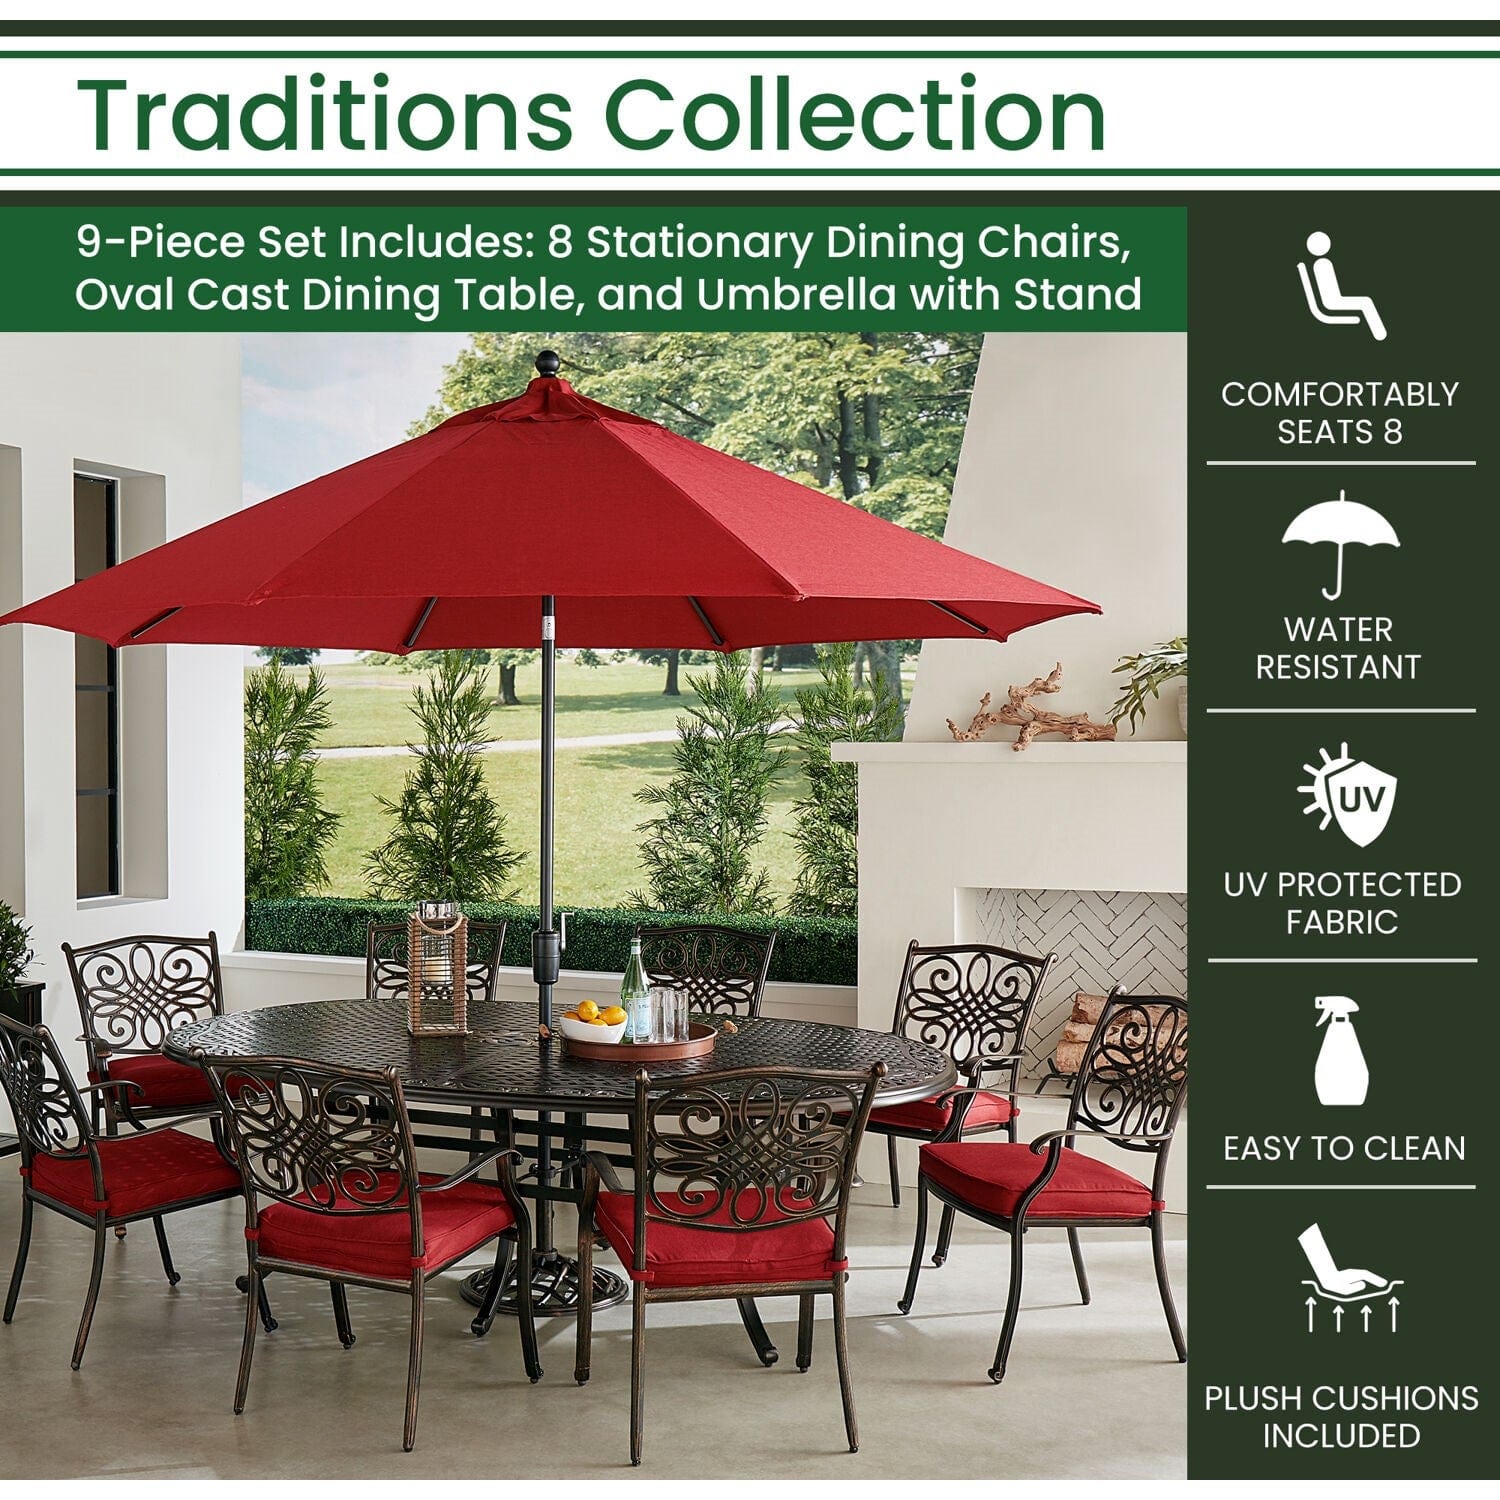 Hanover Outdoor Dining Set Hanover Traditions 9-Piece Dining Set in Red with 8 Dining Chairs, 95-in. x 60-in. Oval Cast-Top Table, Umbrella and Stand | TRADDN9PCOV-SU-R